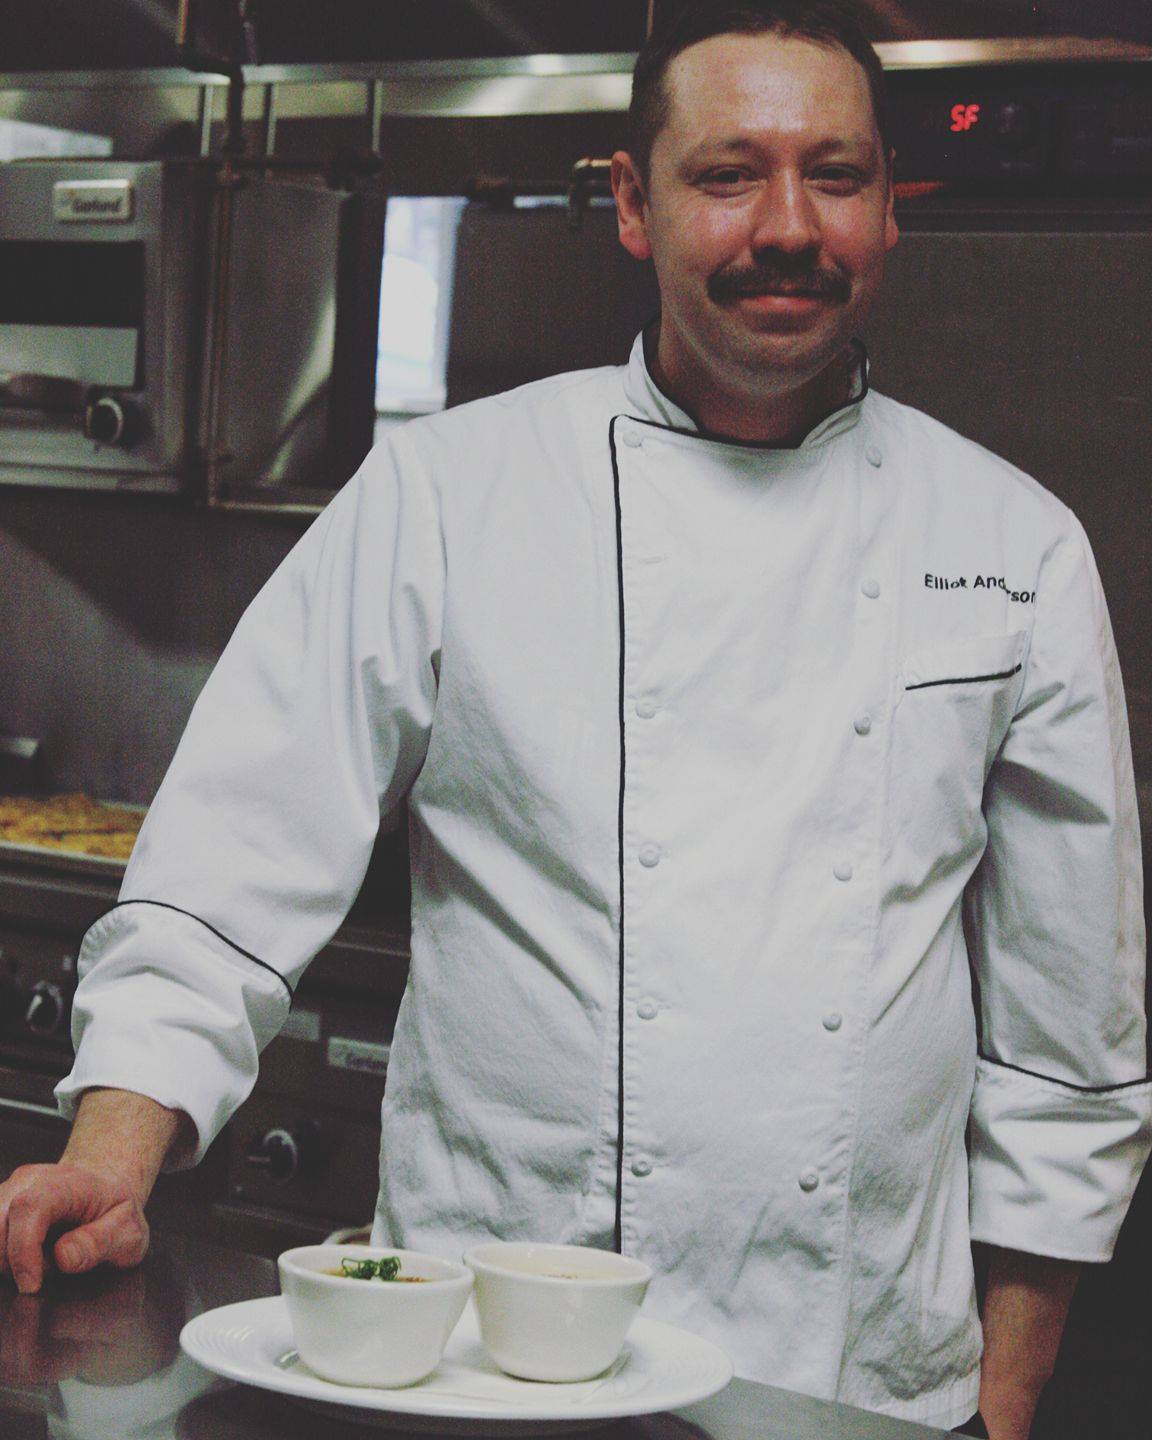 Chef Eliot Anderson of Coltivare poses in the kitchen.